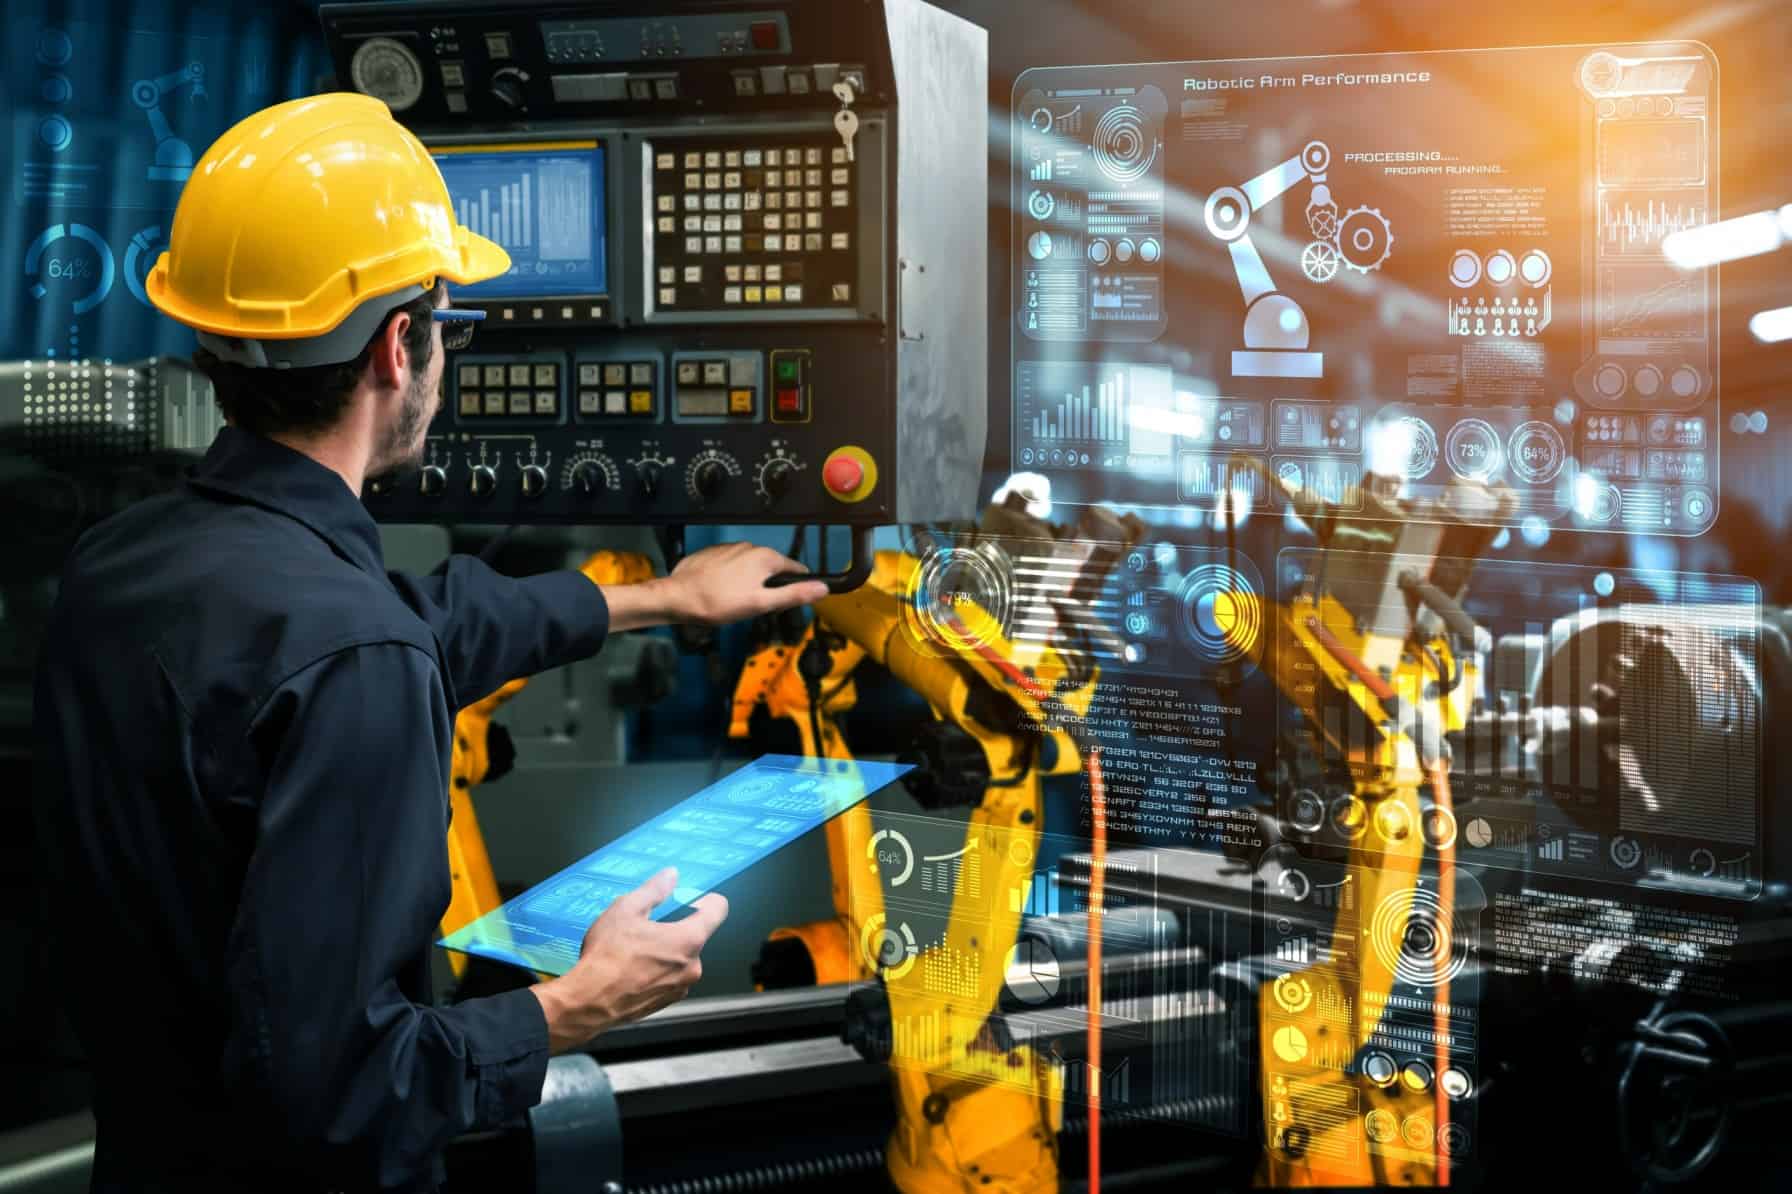 The concept of industry 4.0 and its challenges